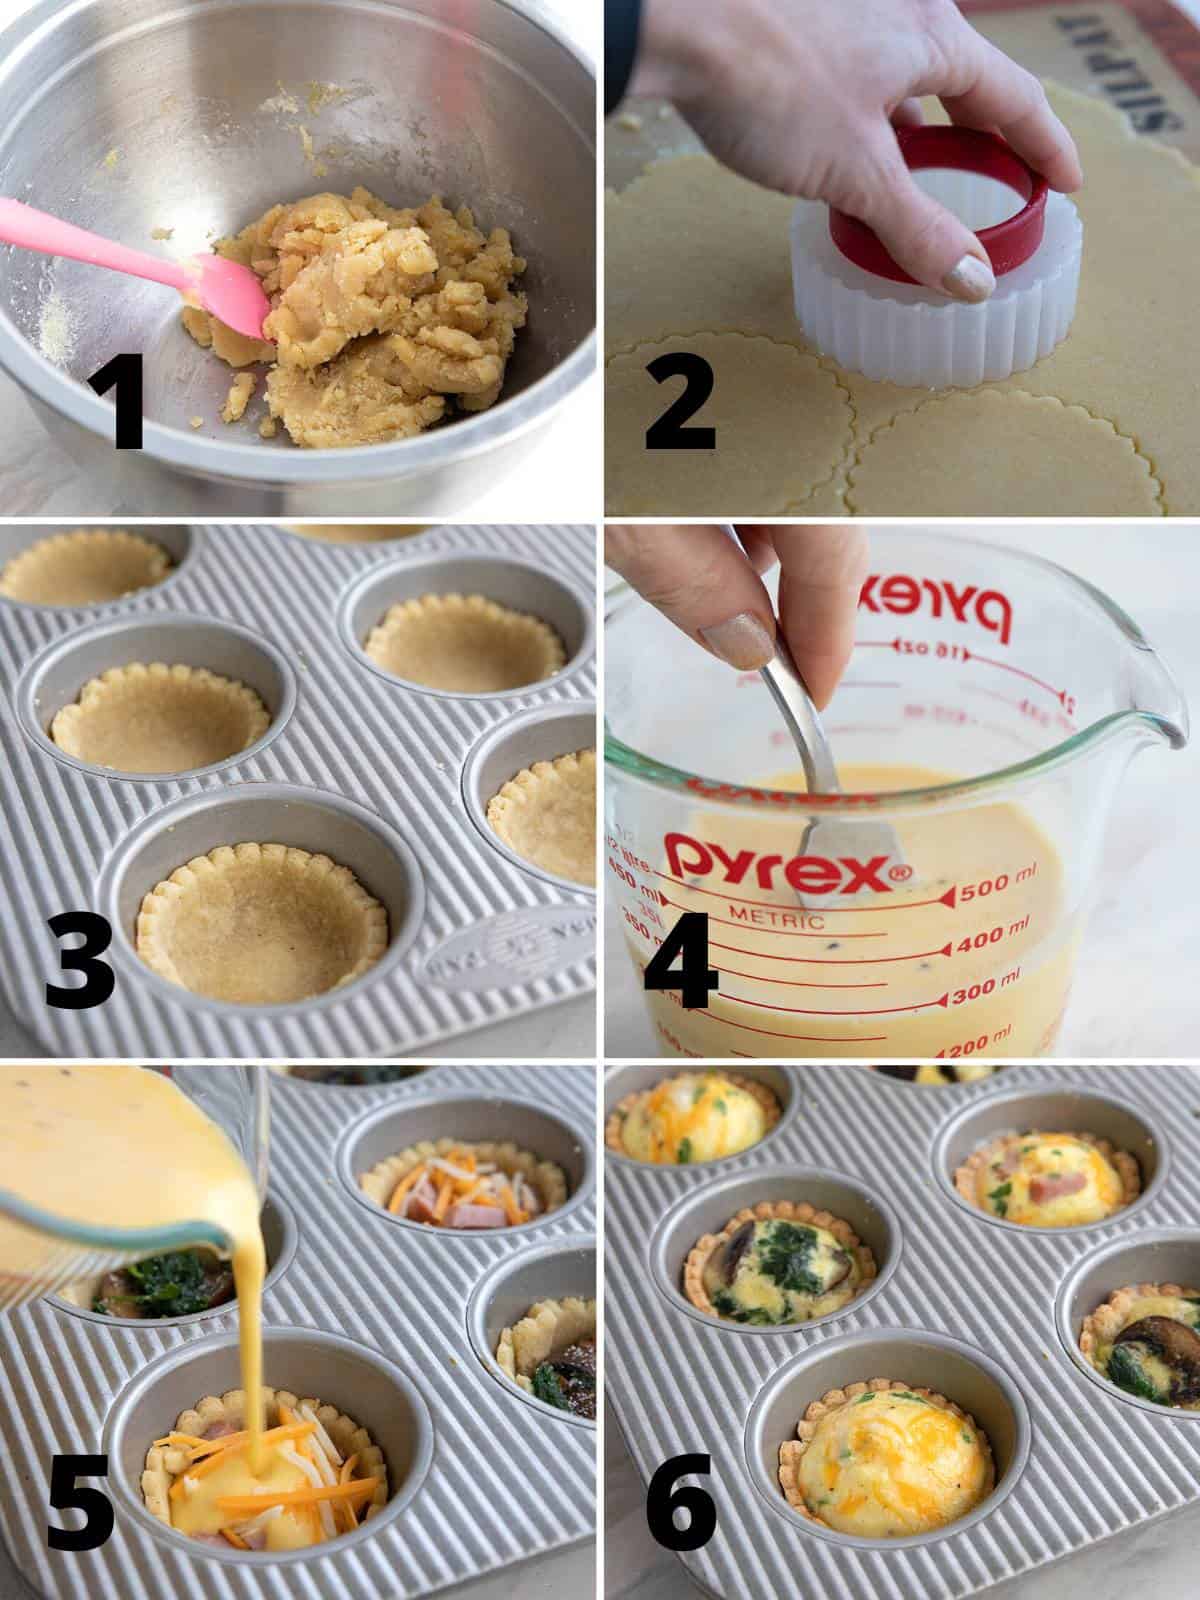 6 images showing the steps for making Keto Mini Quiche.